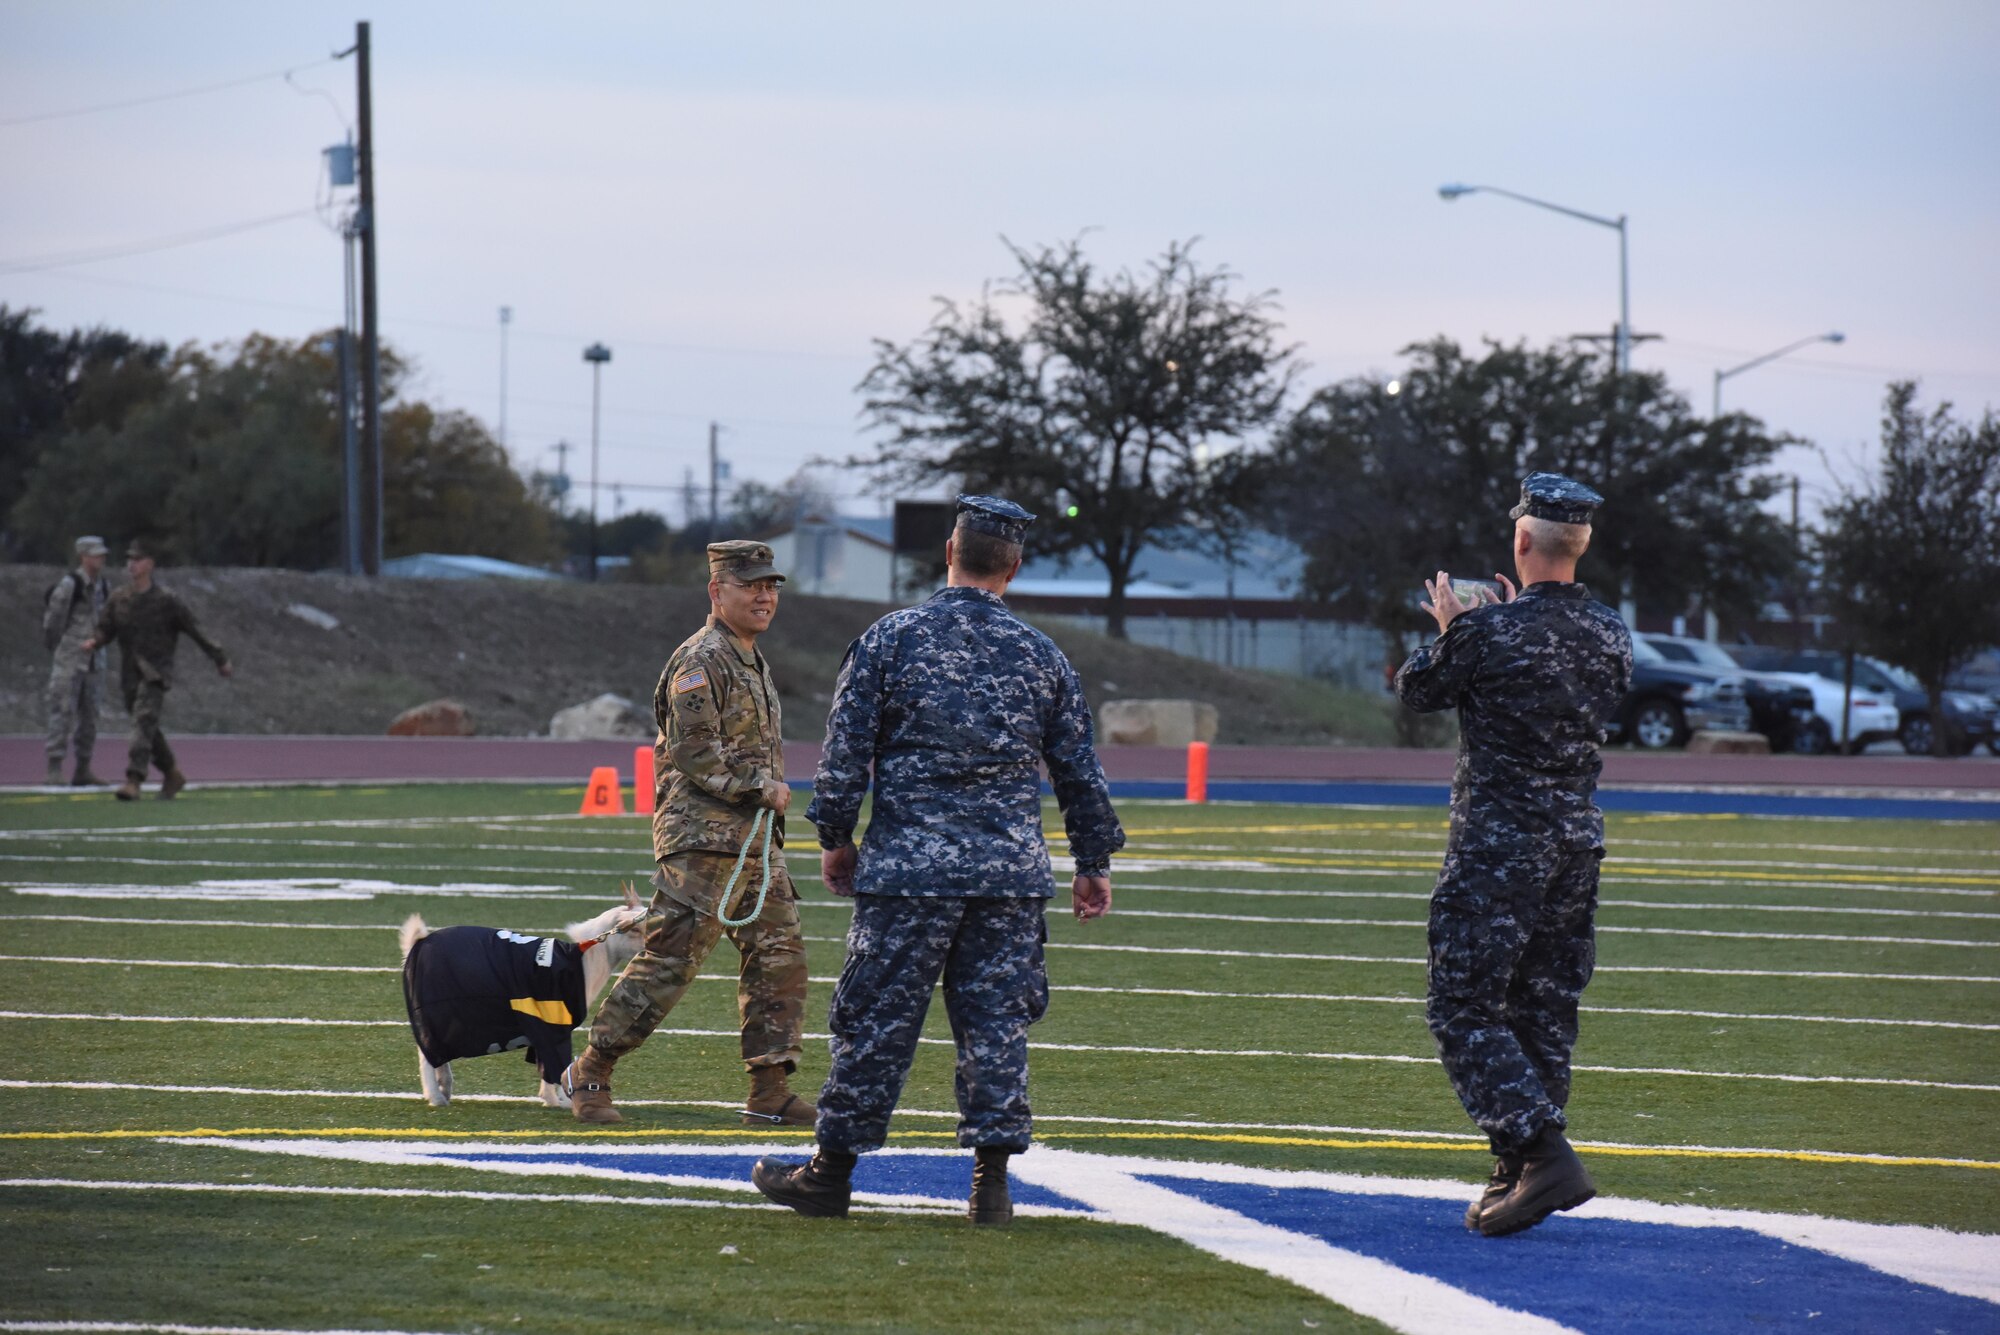 U.S. Army Lt. Col. Yukio Kuniyuki, 344th Military Intelligence Battalion commander, walks Marshmallow around after the Army-Navy game at the Mathis Fitness Center field, Dec. 1. Marshmallow is the mascot of the Navy team, the losing team had to take a walk with the winning team’s mascot before everyone. (U.S. Air Force photo by Airman 1st Class Zachary Chapman/Released)